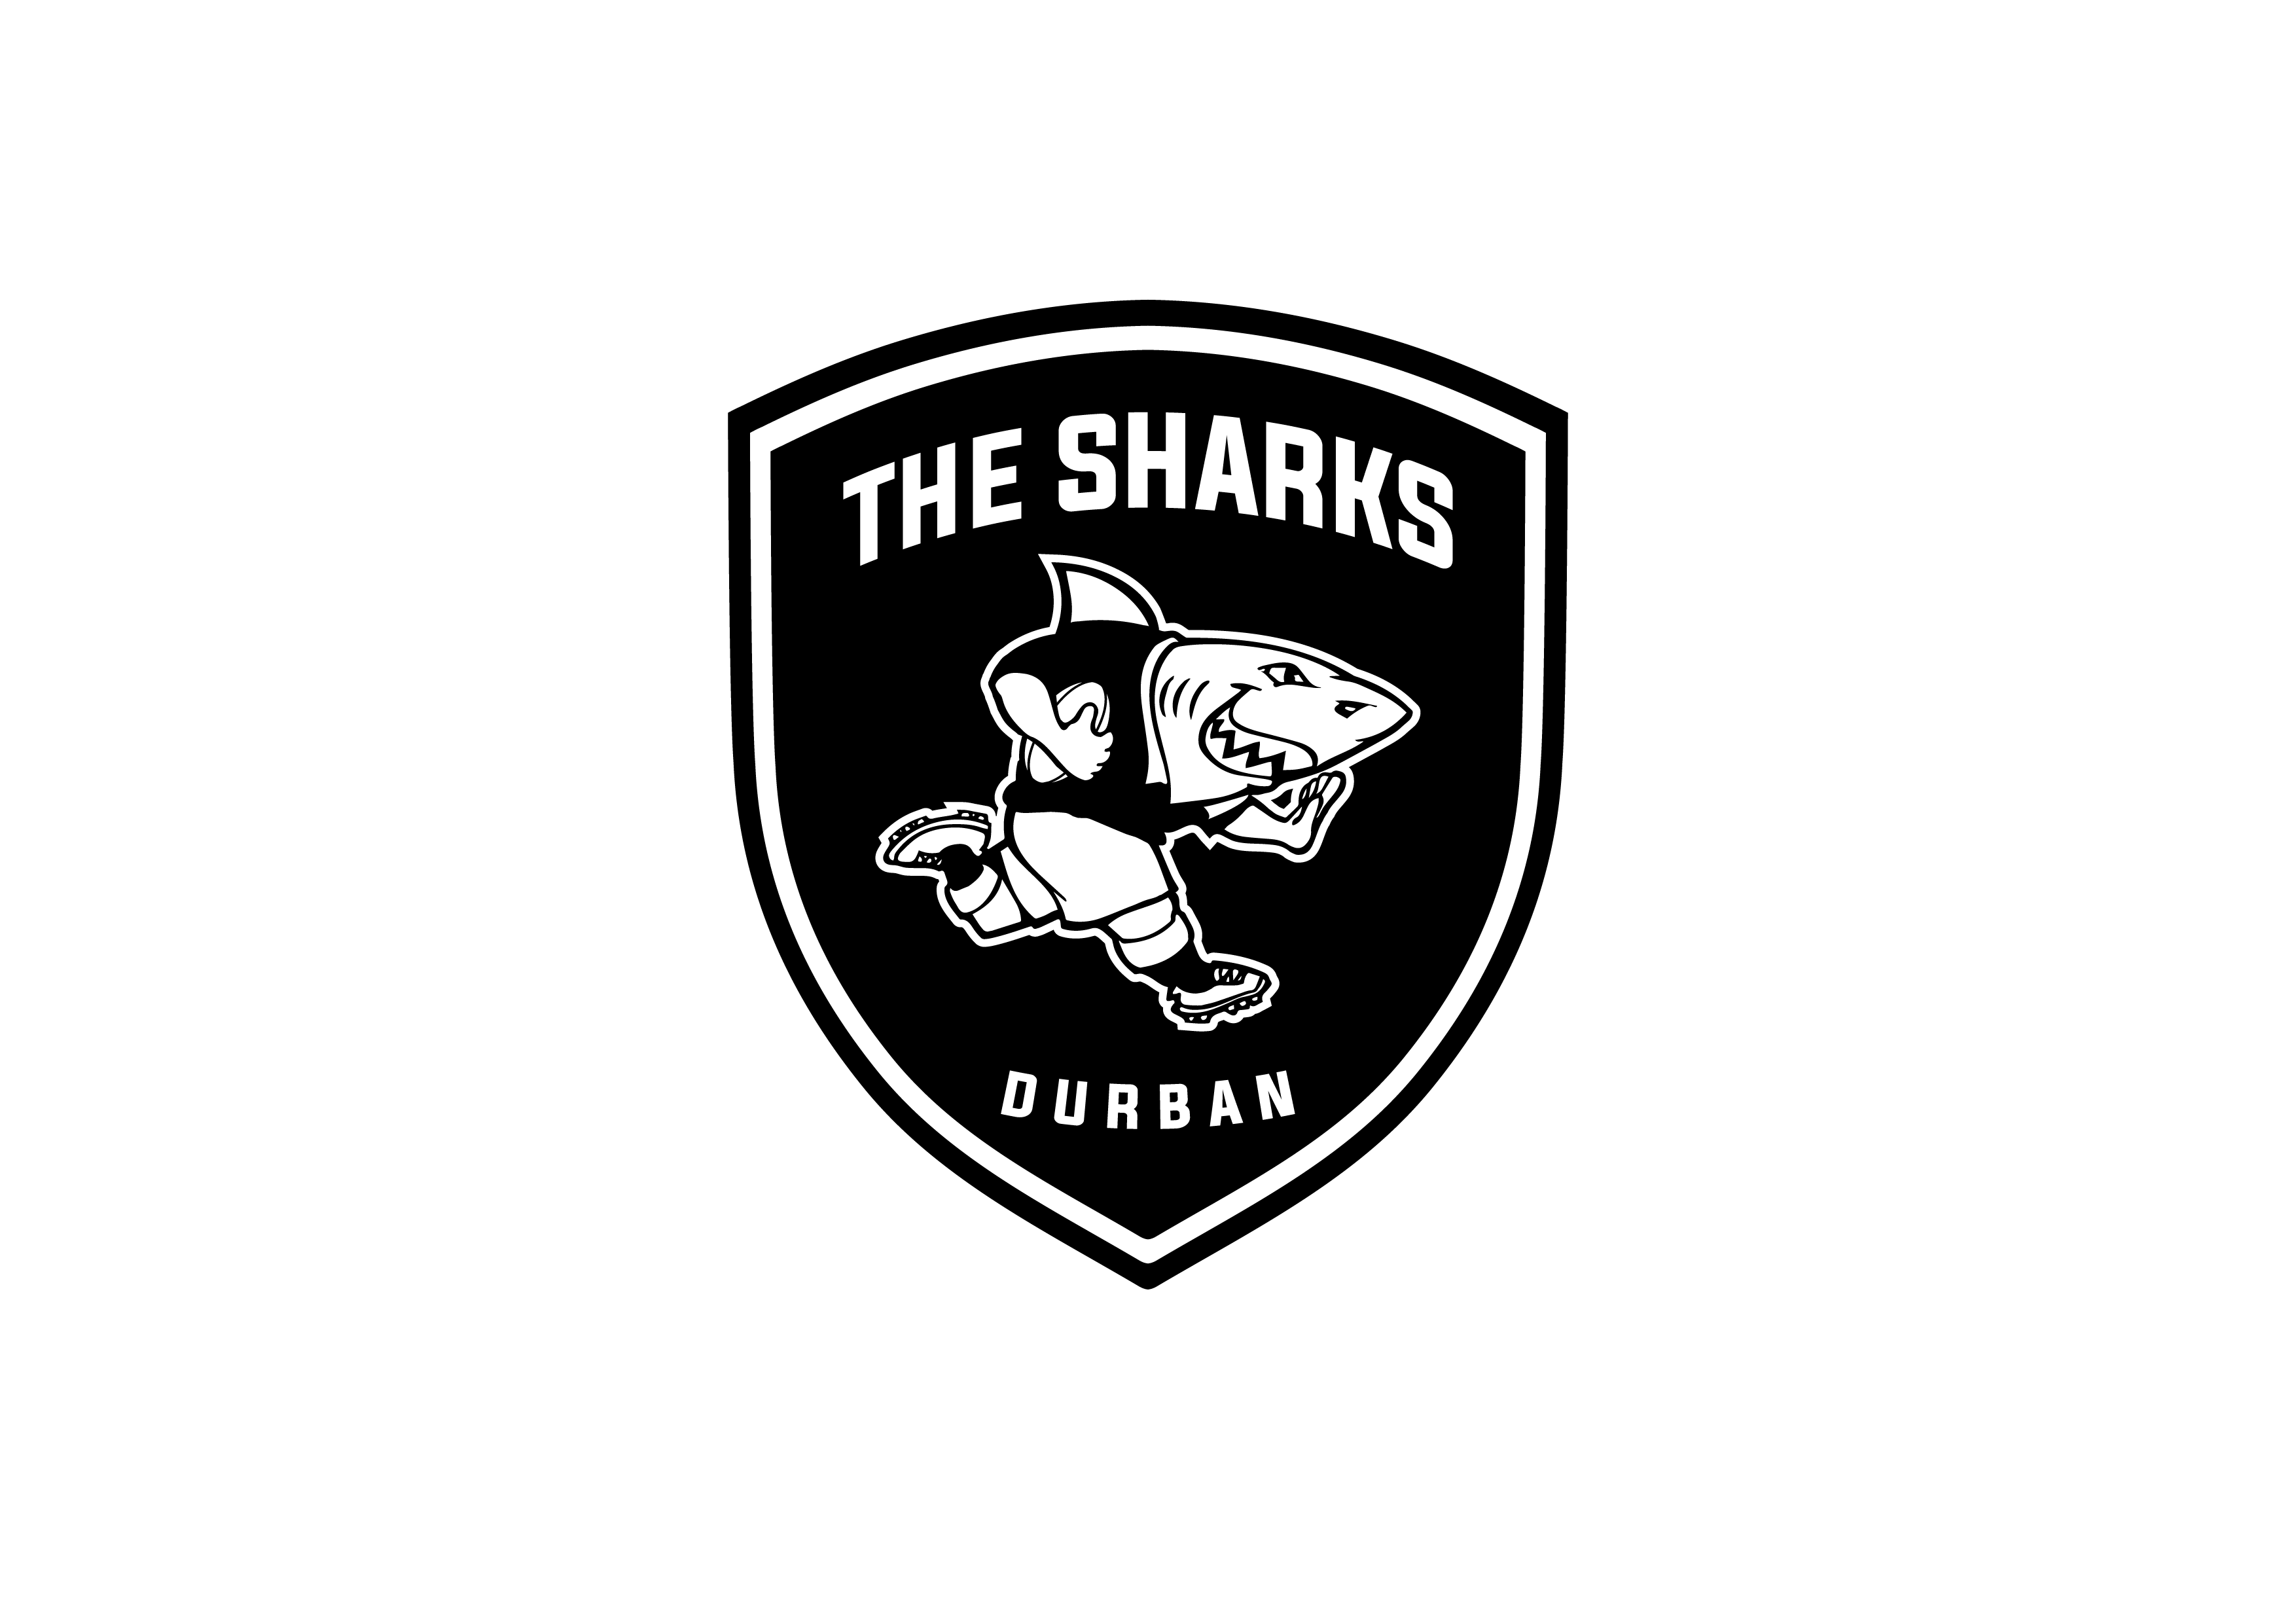 Sharks Rugby